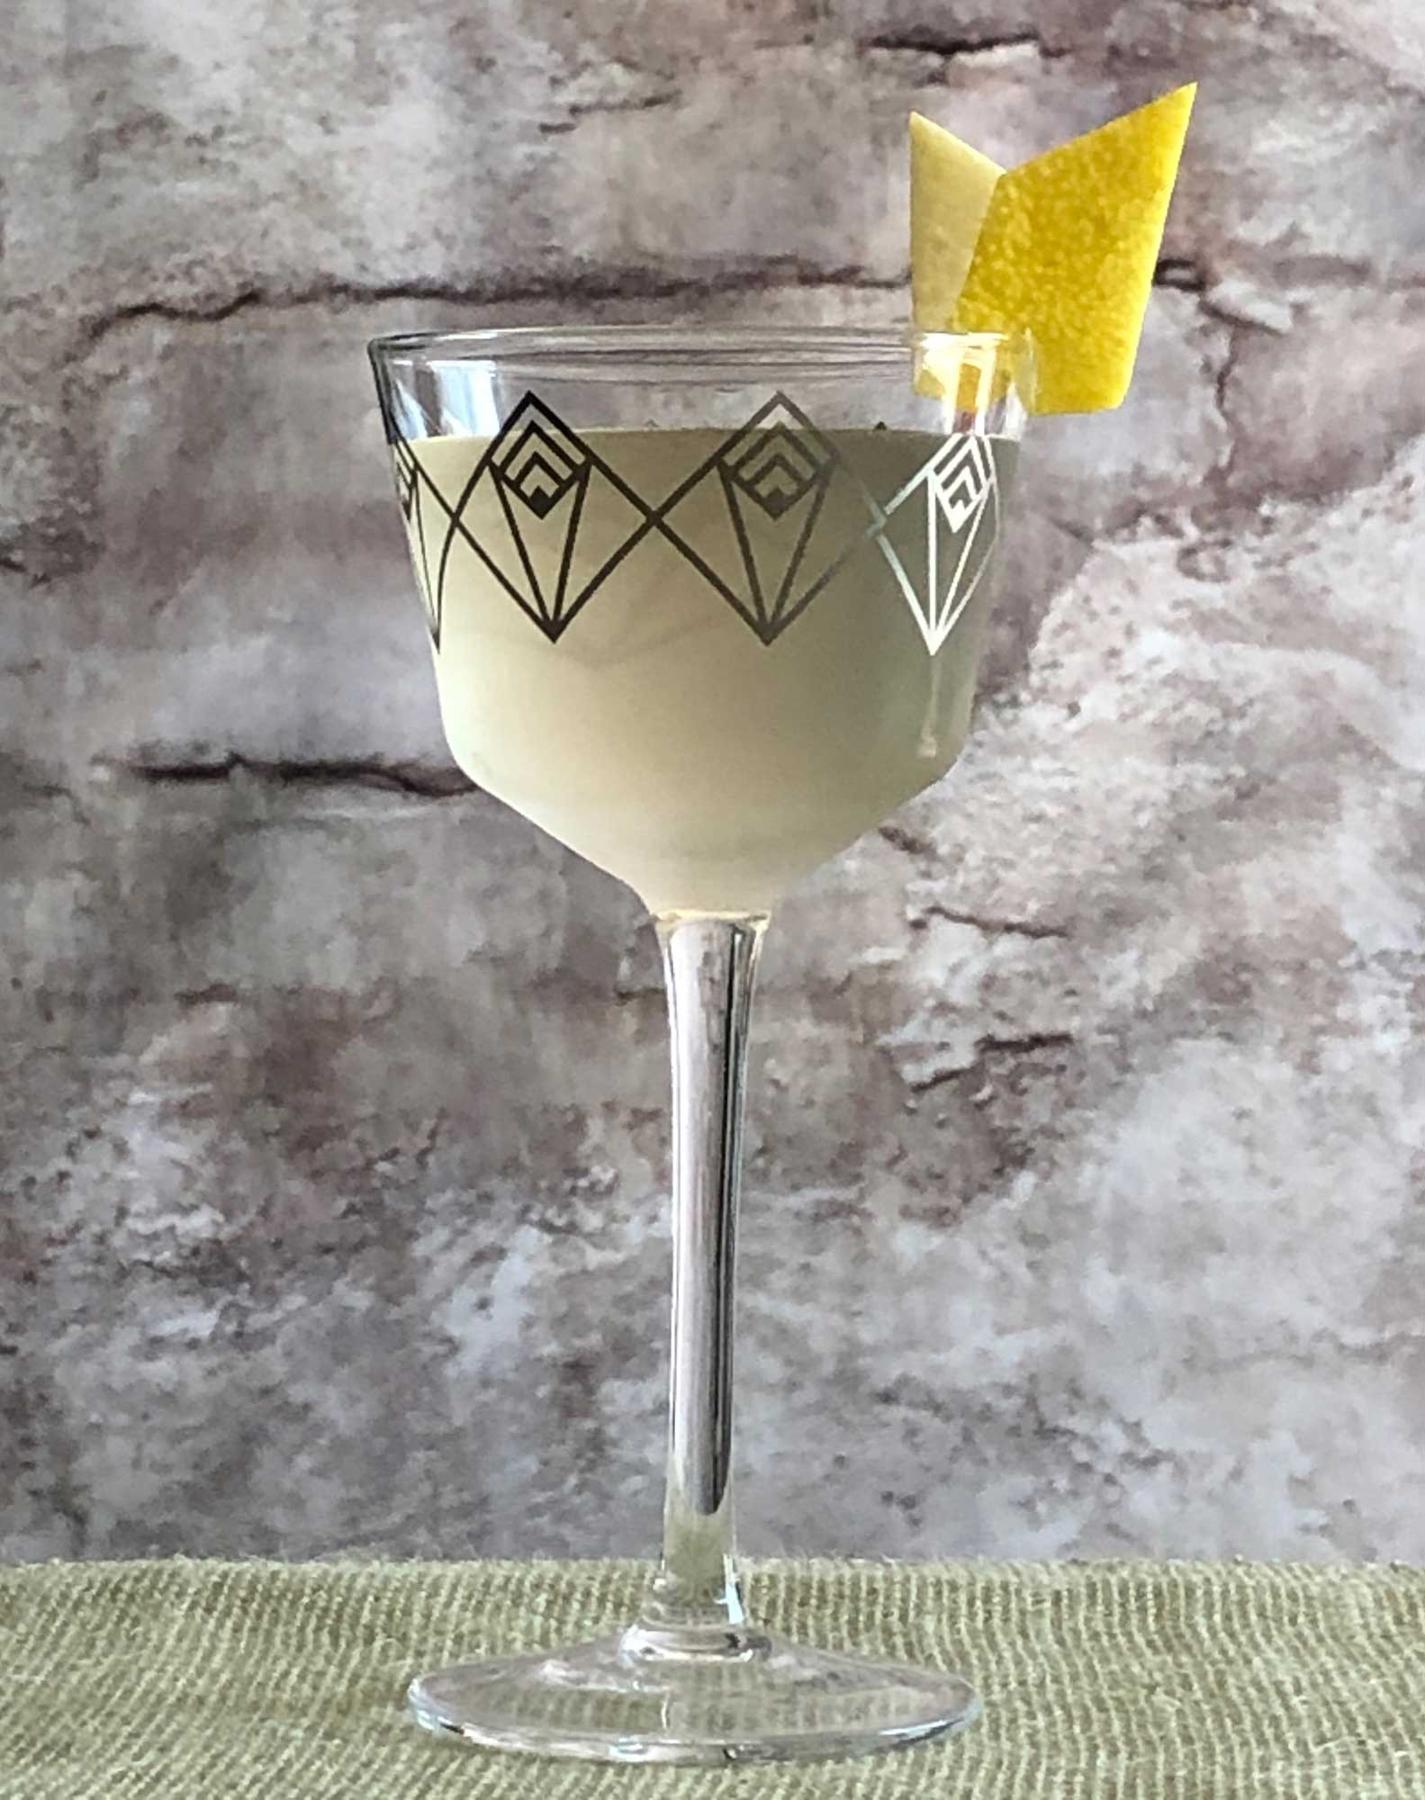 An example of the Flowering Pear, the mixed drink (drink) featuring Dolin Dry Vermouth de Chambéry, Rothman & Winter Orchard Pear Liqueur, absinthe, and lemon twist; photo by Lee Edwards